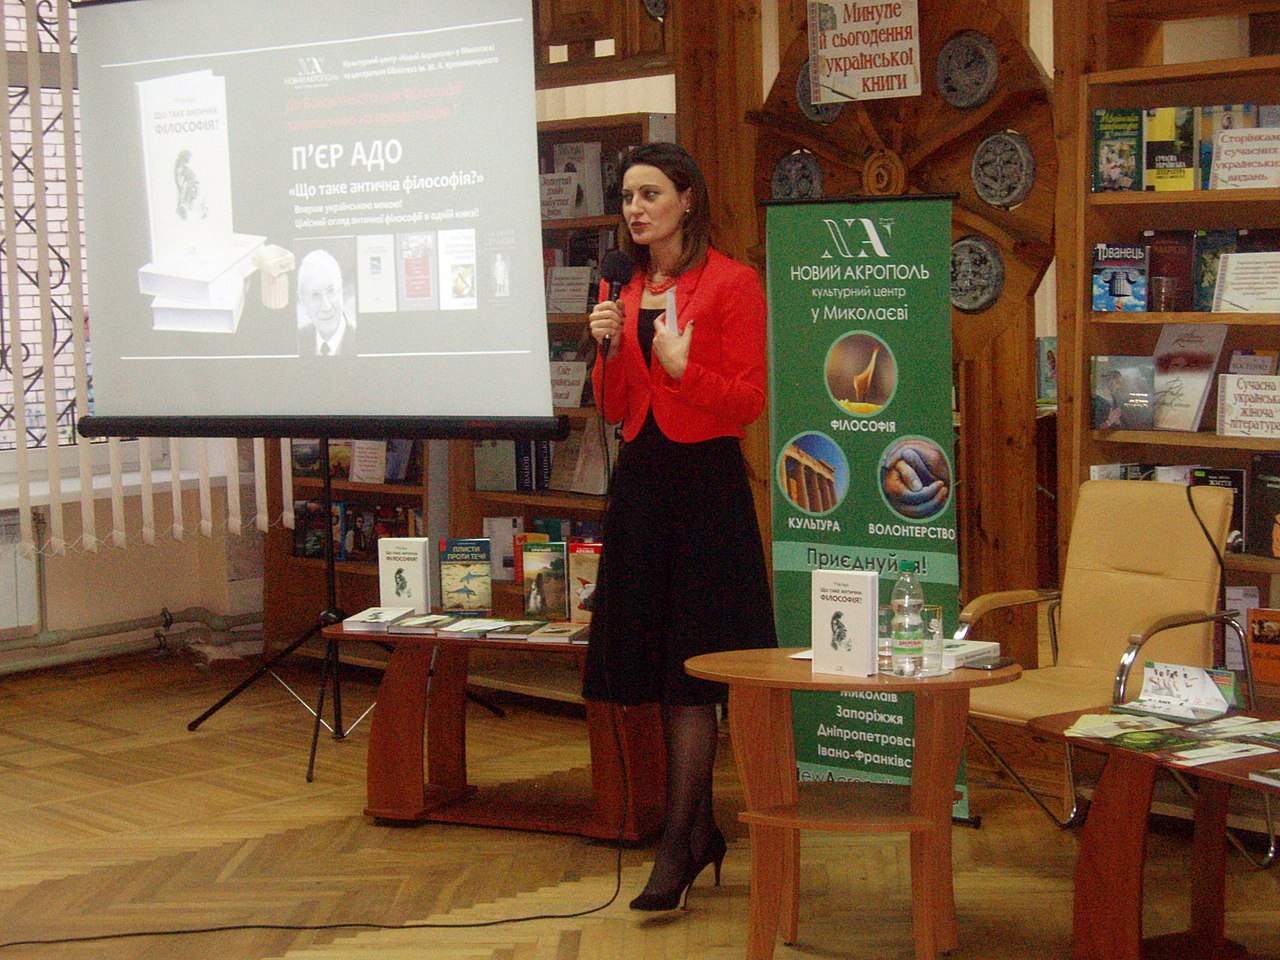 Presentation of books published by New Acropolis in Ukraine in the Central Library of Mykolaiv city